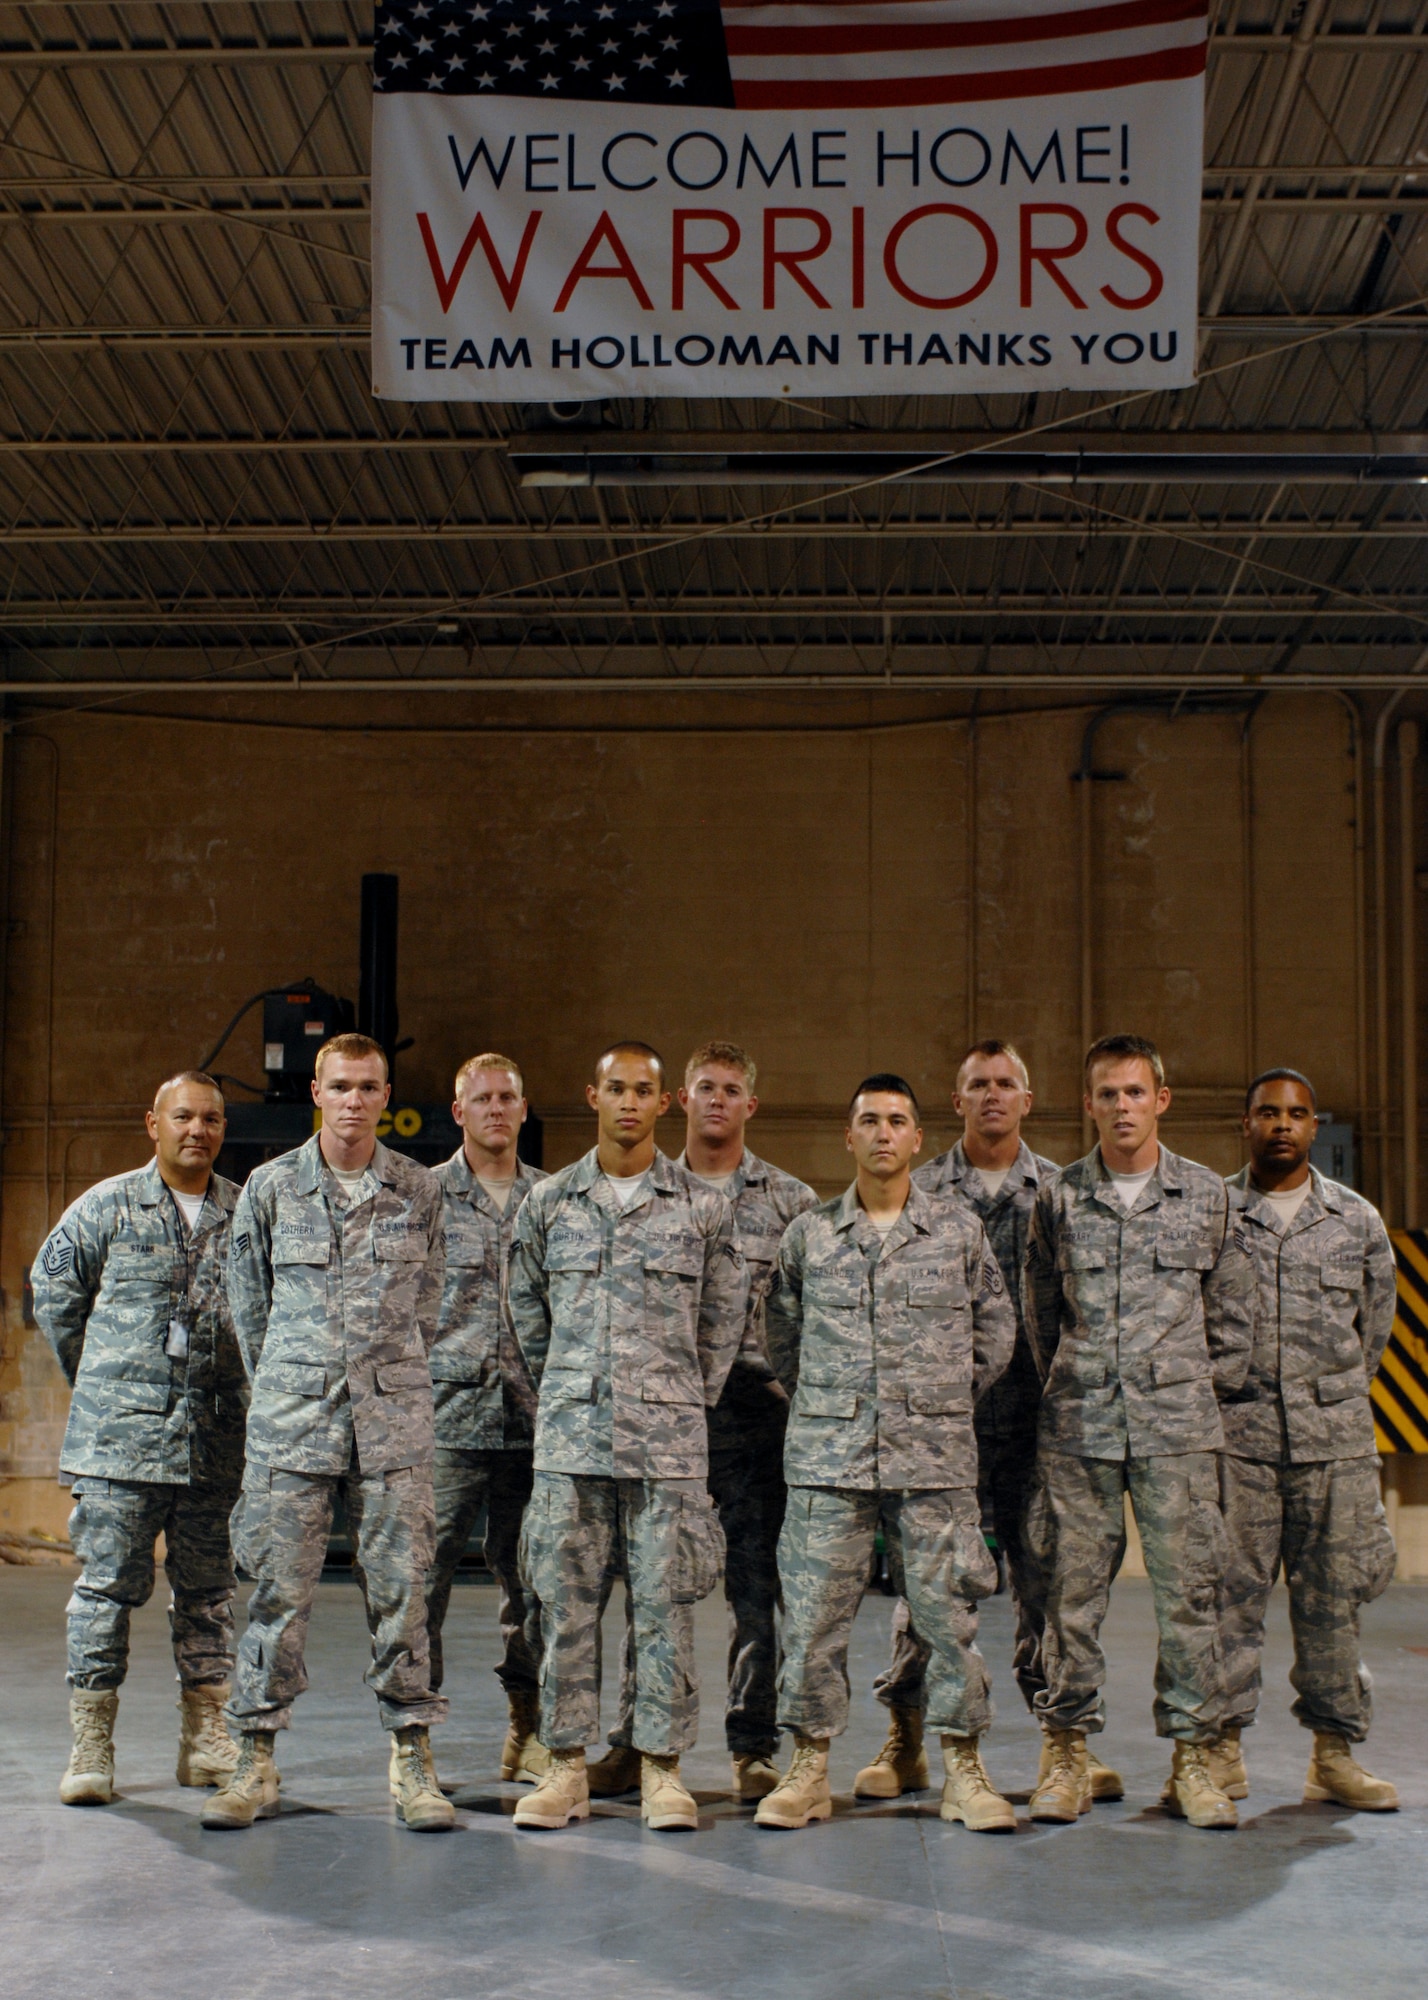 Eight members from the 49th Materiel Maintenance Group pose for a group photo in the weapons vault at Holloman Air Force Base, N.M., October 8. First Sergeant Master Sgt. Brian Starr, from the 49th Materiel Maintenance, welcomes home warriors after 64 days of deployment to Bahgram, Kandahar and Jalalabad. (U.S. Air Force photo/ Airman 1st Class Veronica Salgado)